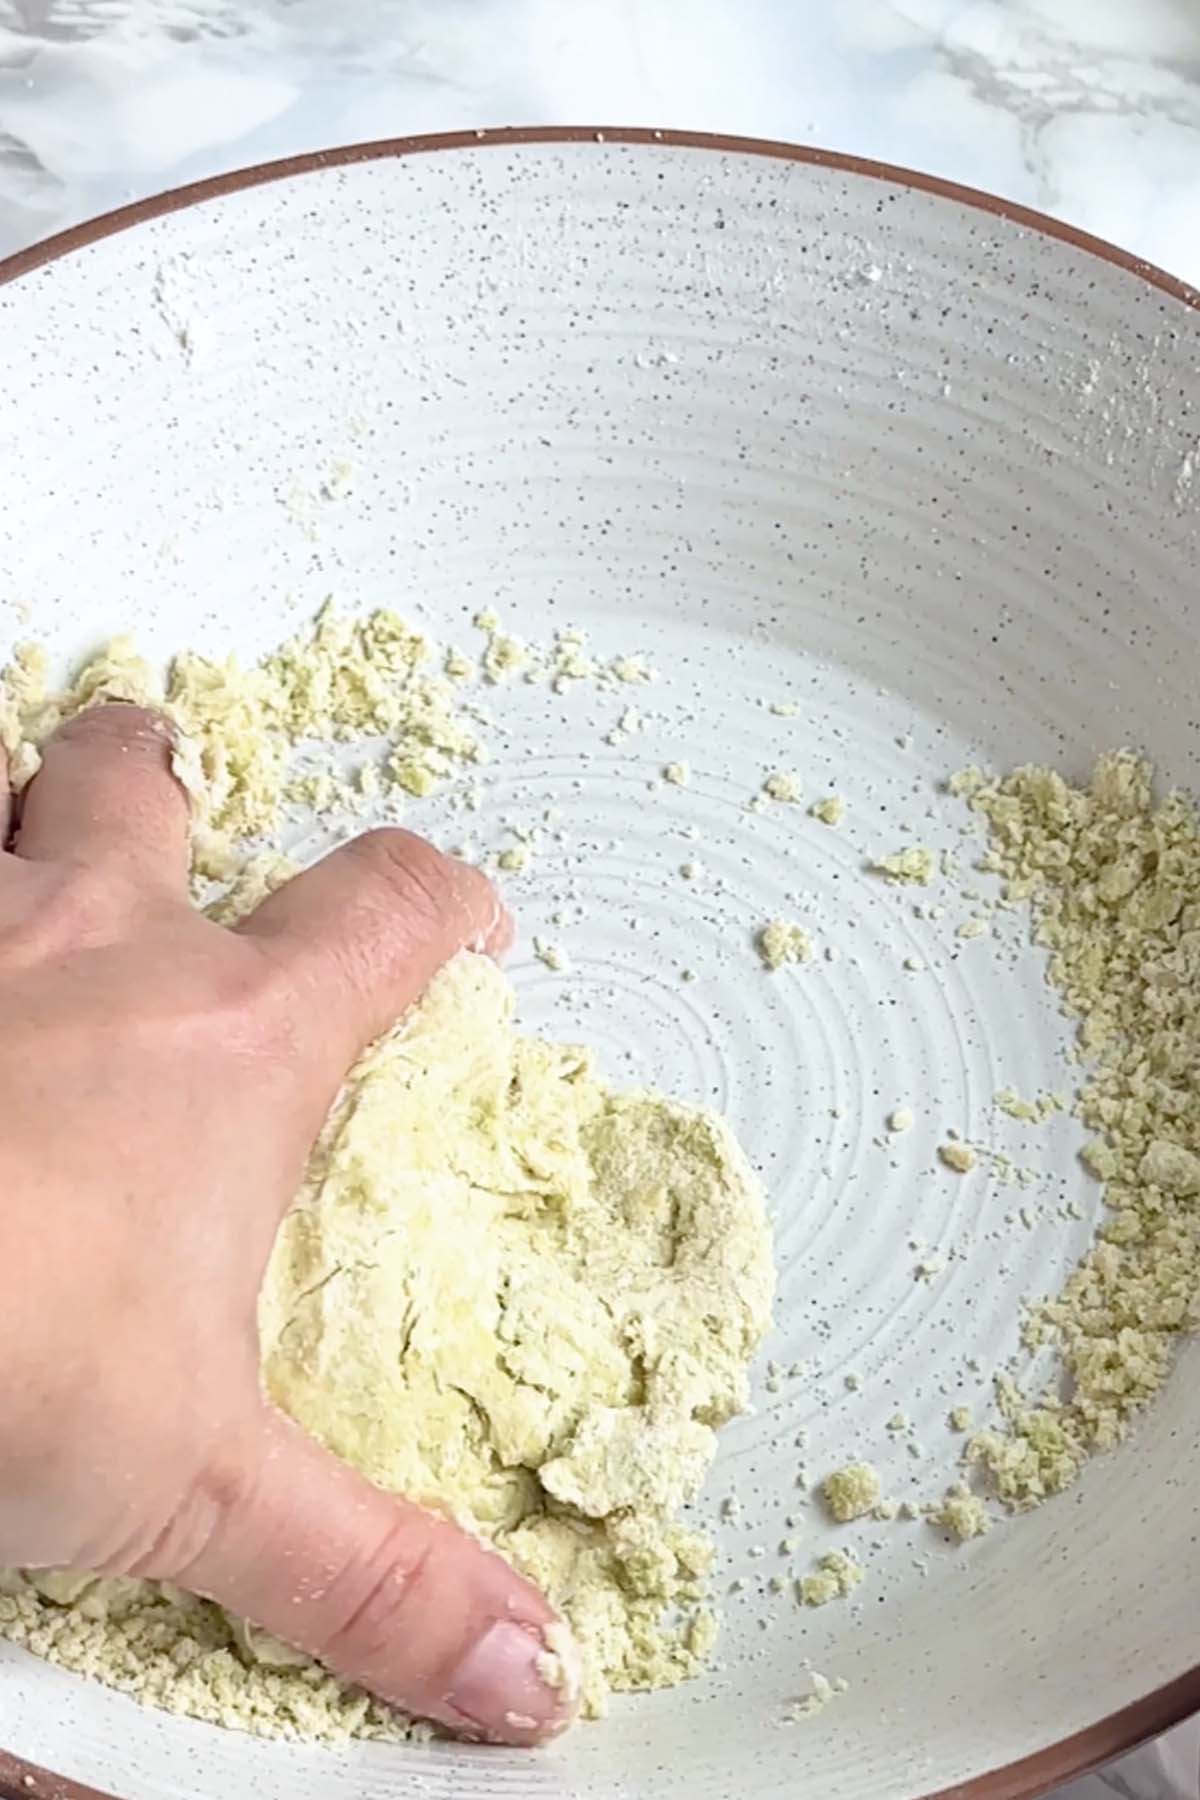 Pie dough is combined by hand.